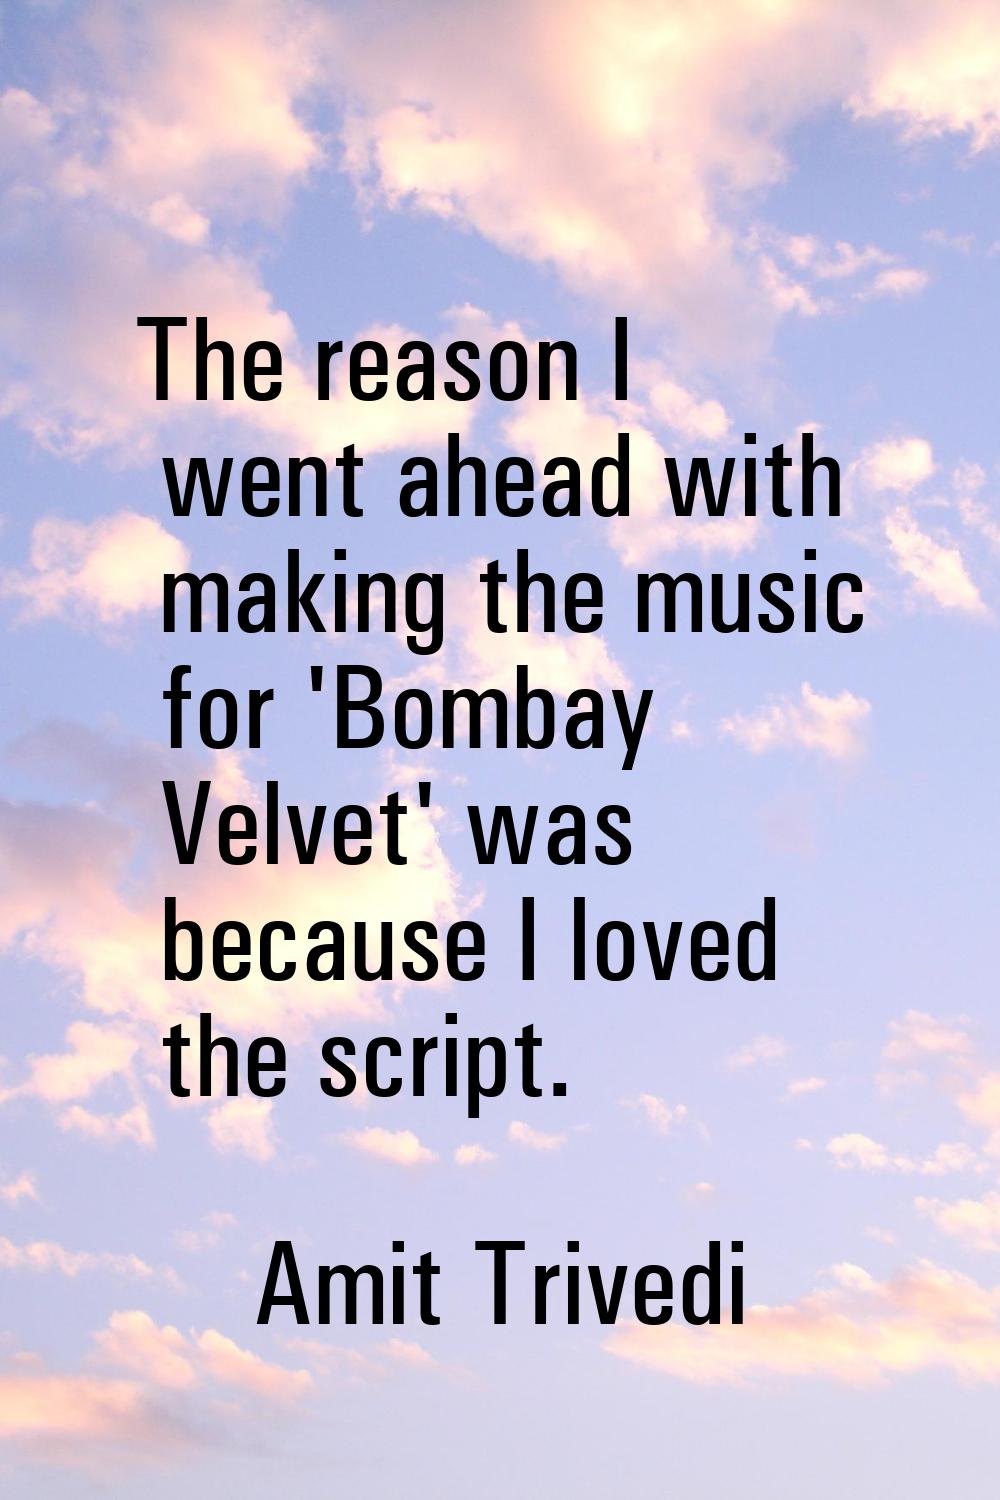 The reason I went ahead with making the music for 'Bombay Velvet' was because I loved the script.